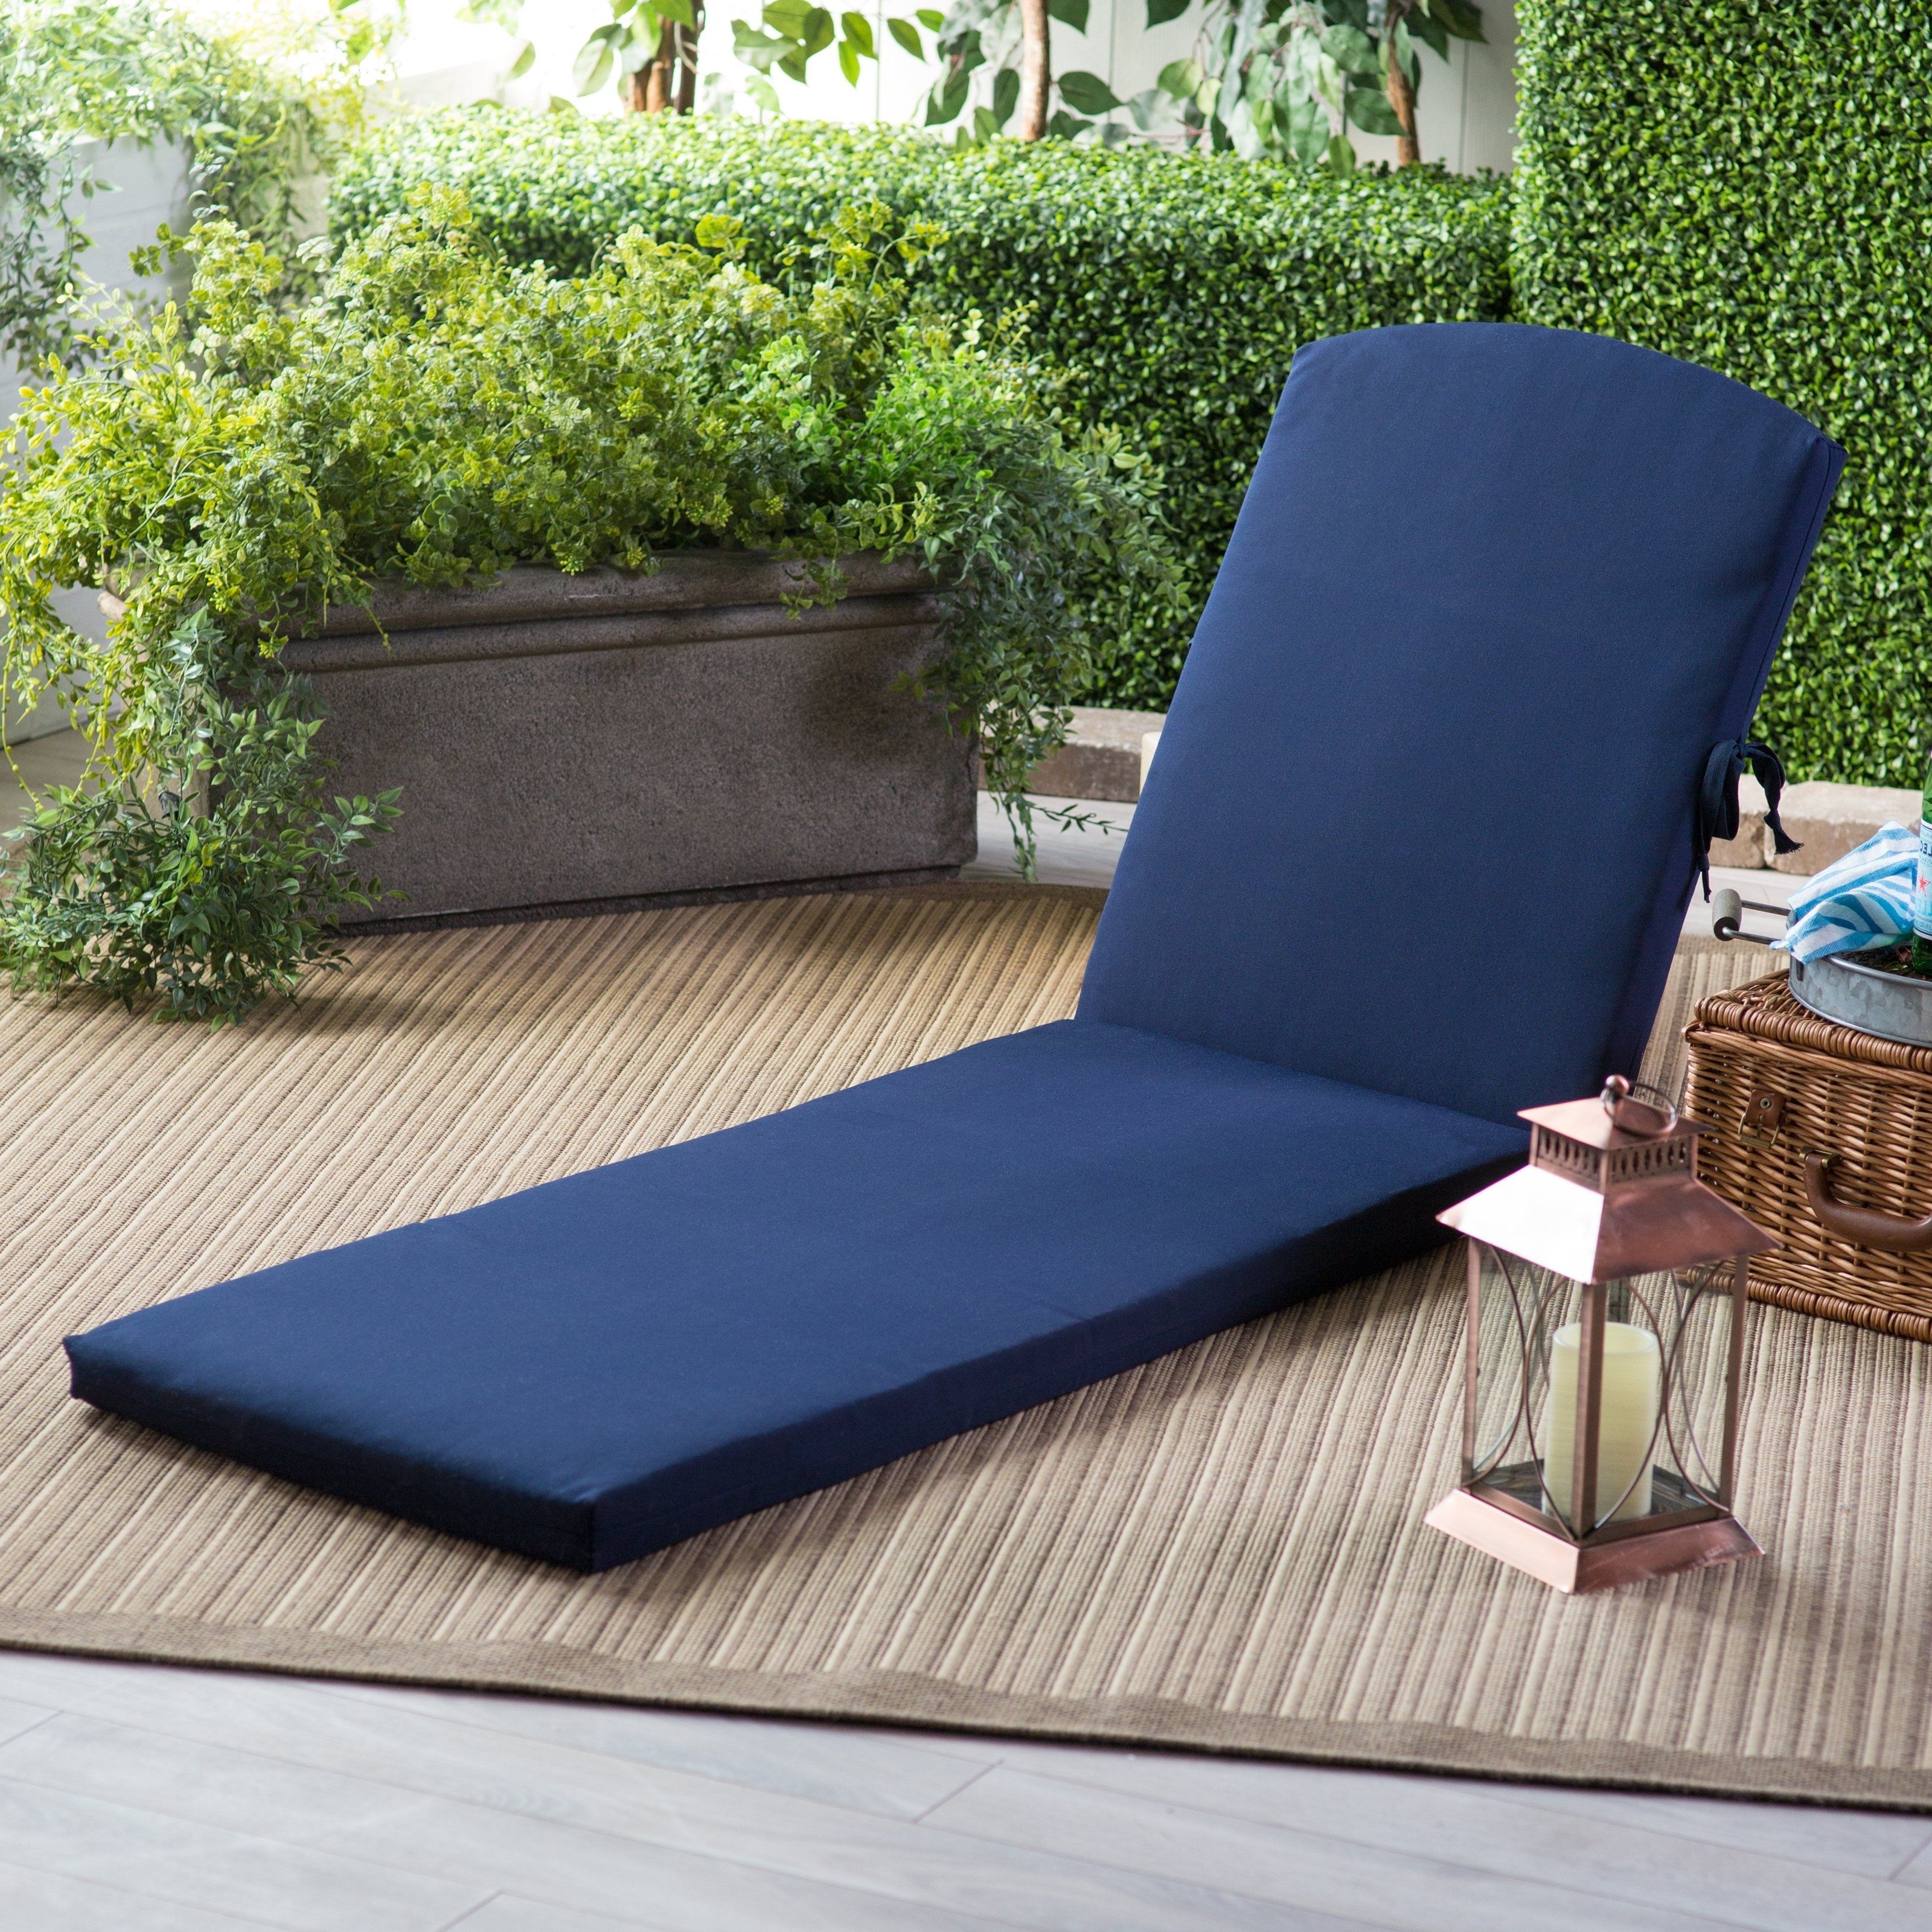 Cushion Pads For Outdoor Chaise Lounge Chairs Pertaining To Well Known Chaise Lounge Chair Pads • Lounge Chairs Ideas (View 1 of 15)